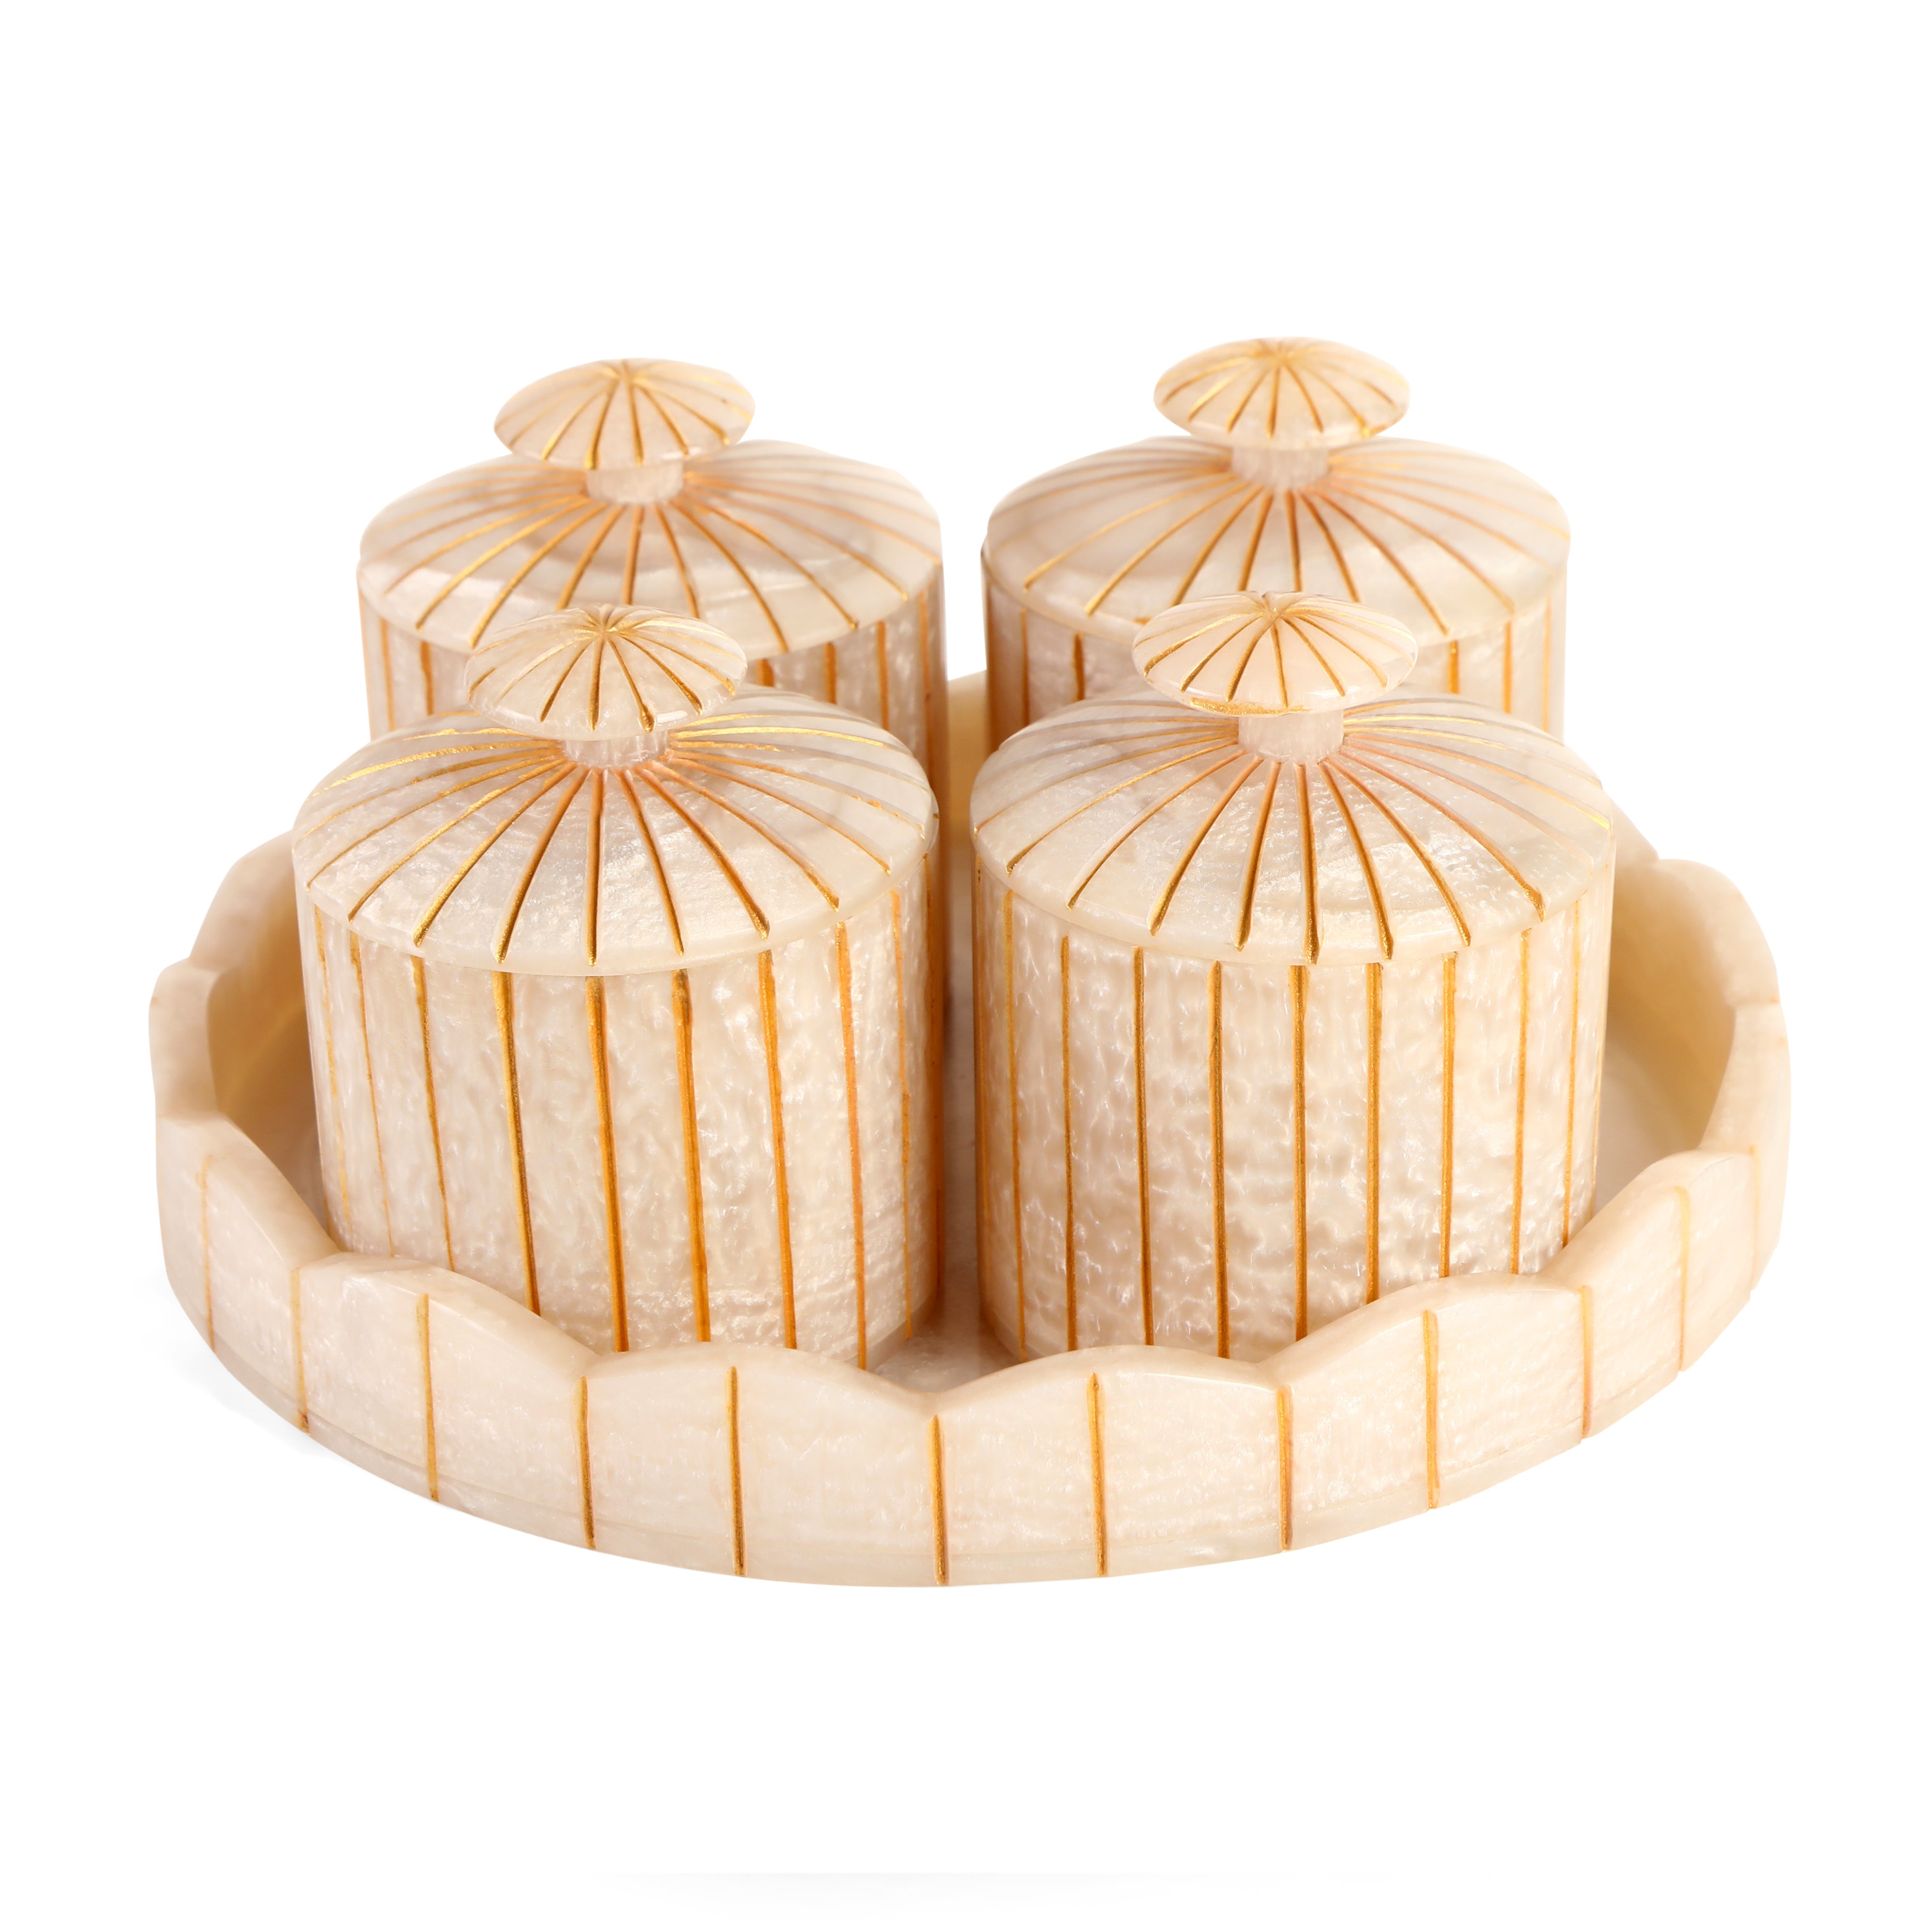 Resin Jar Set With Tray - Set of 4 (Ivory) 1- The Home Co.